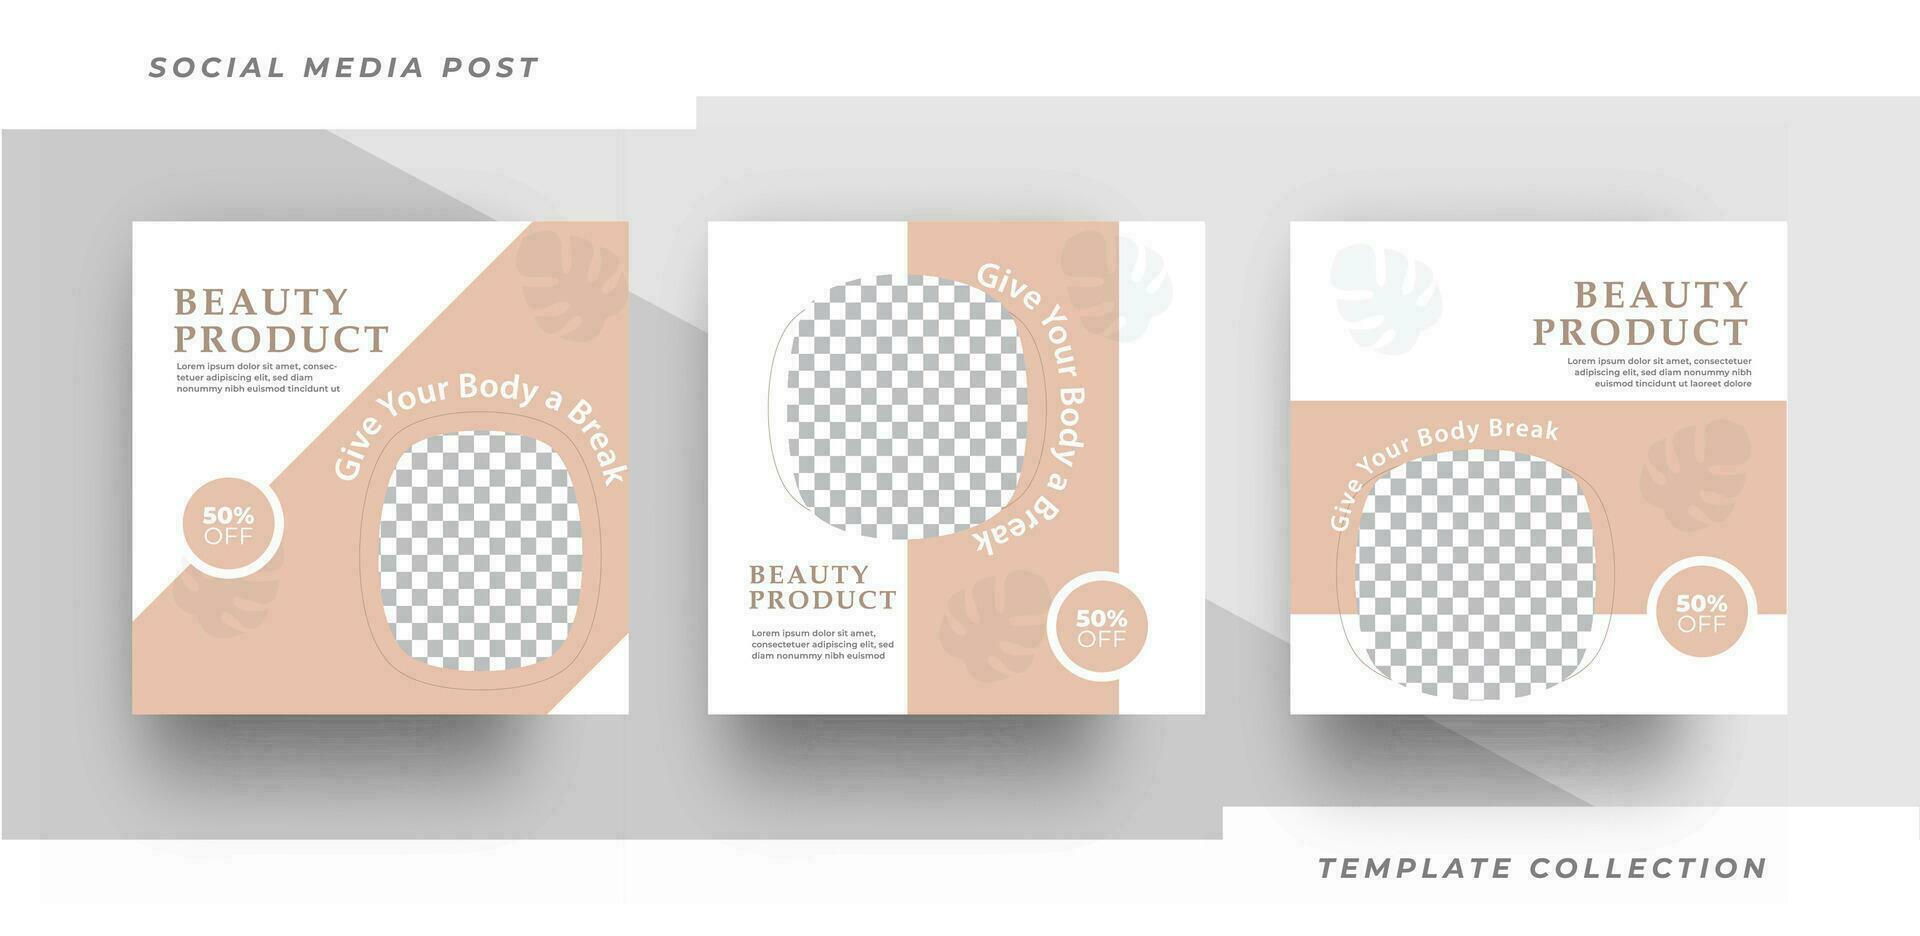 Beauty and spa skincare Makeup Salon square banner collection Square Flyer Template Design. Pro Vector